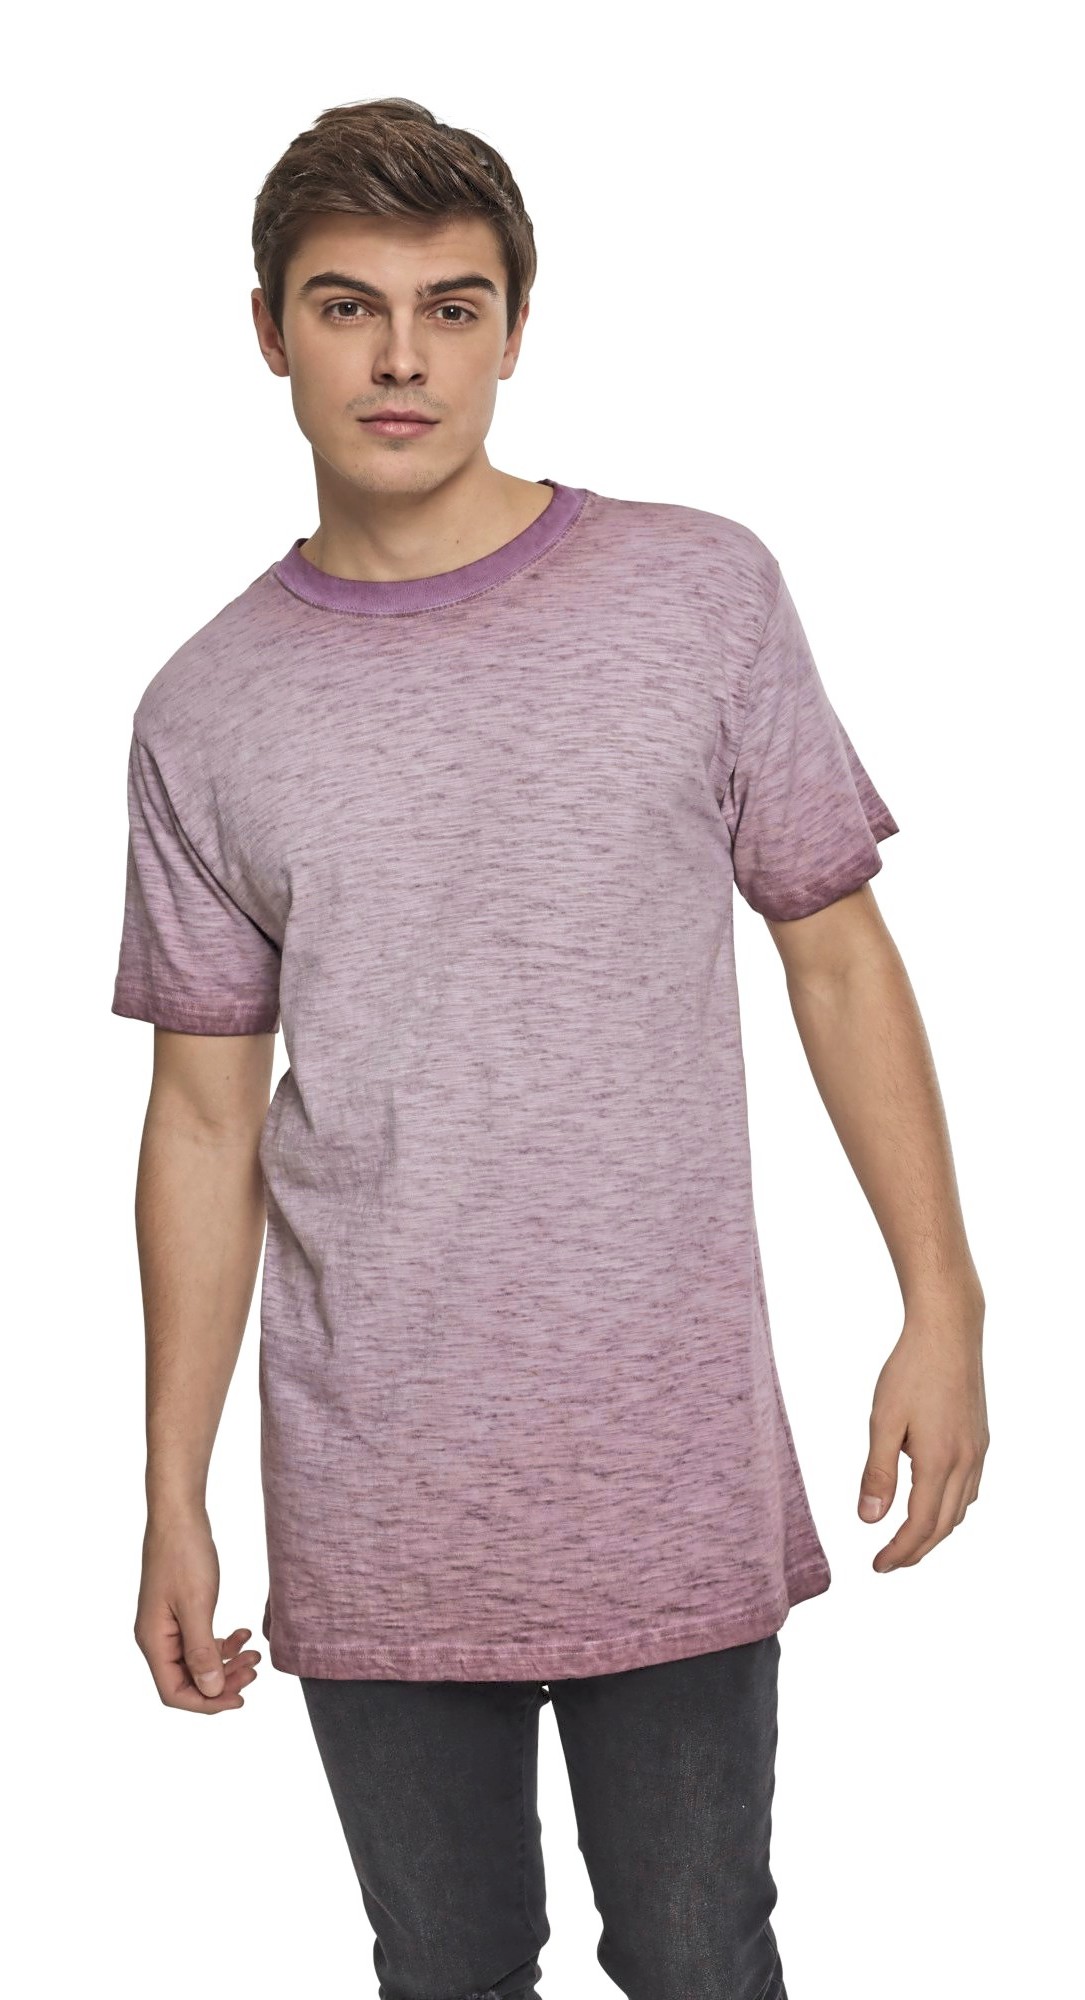 Rundhals Shirts - Build Your Brand - Spray Dye Tee - BY072